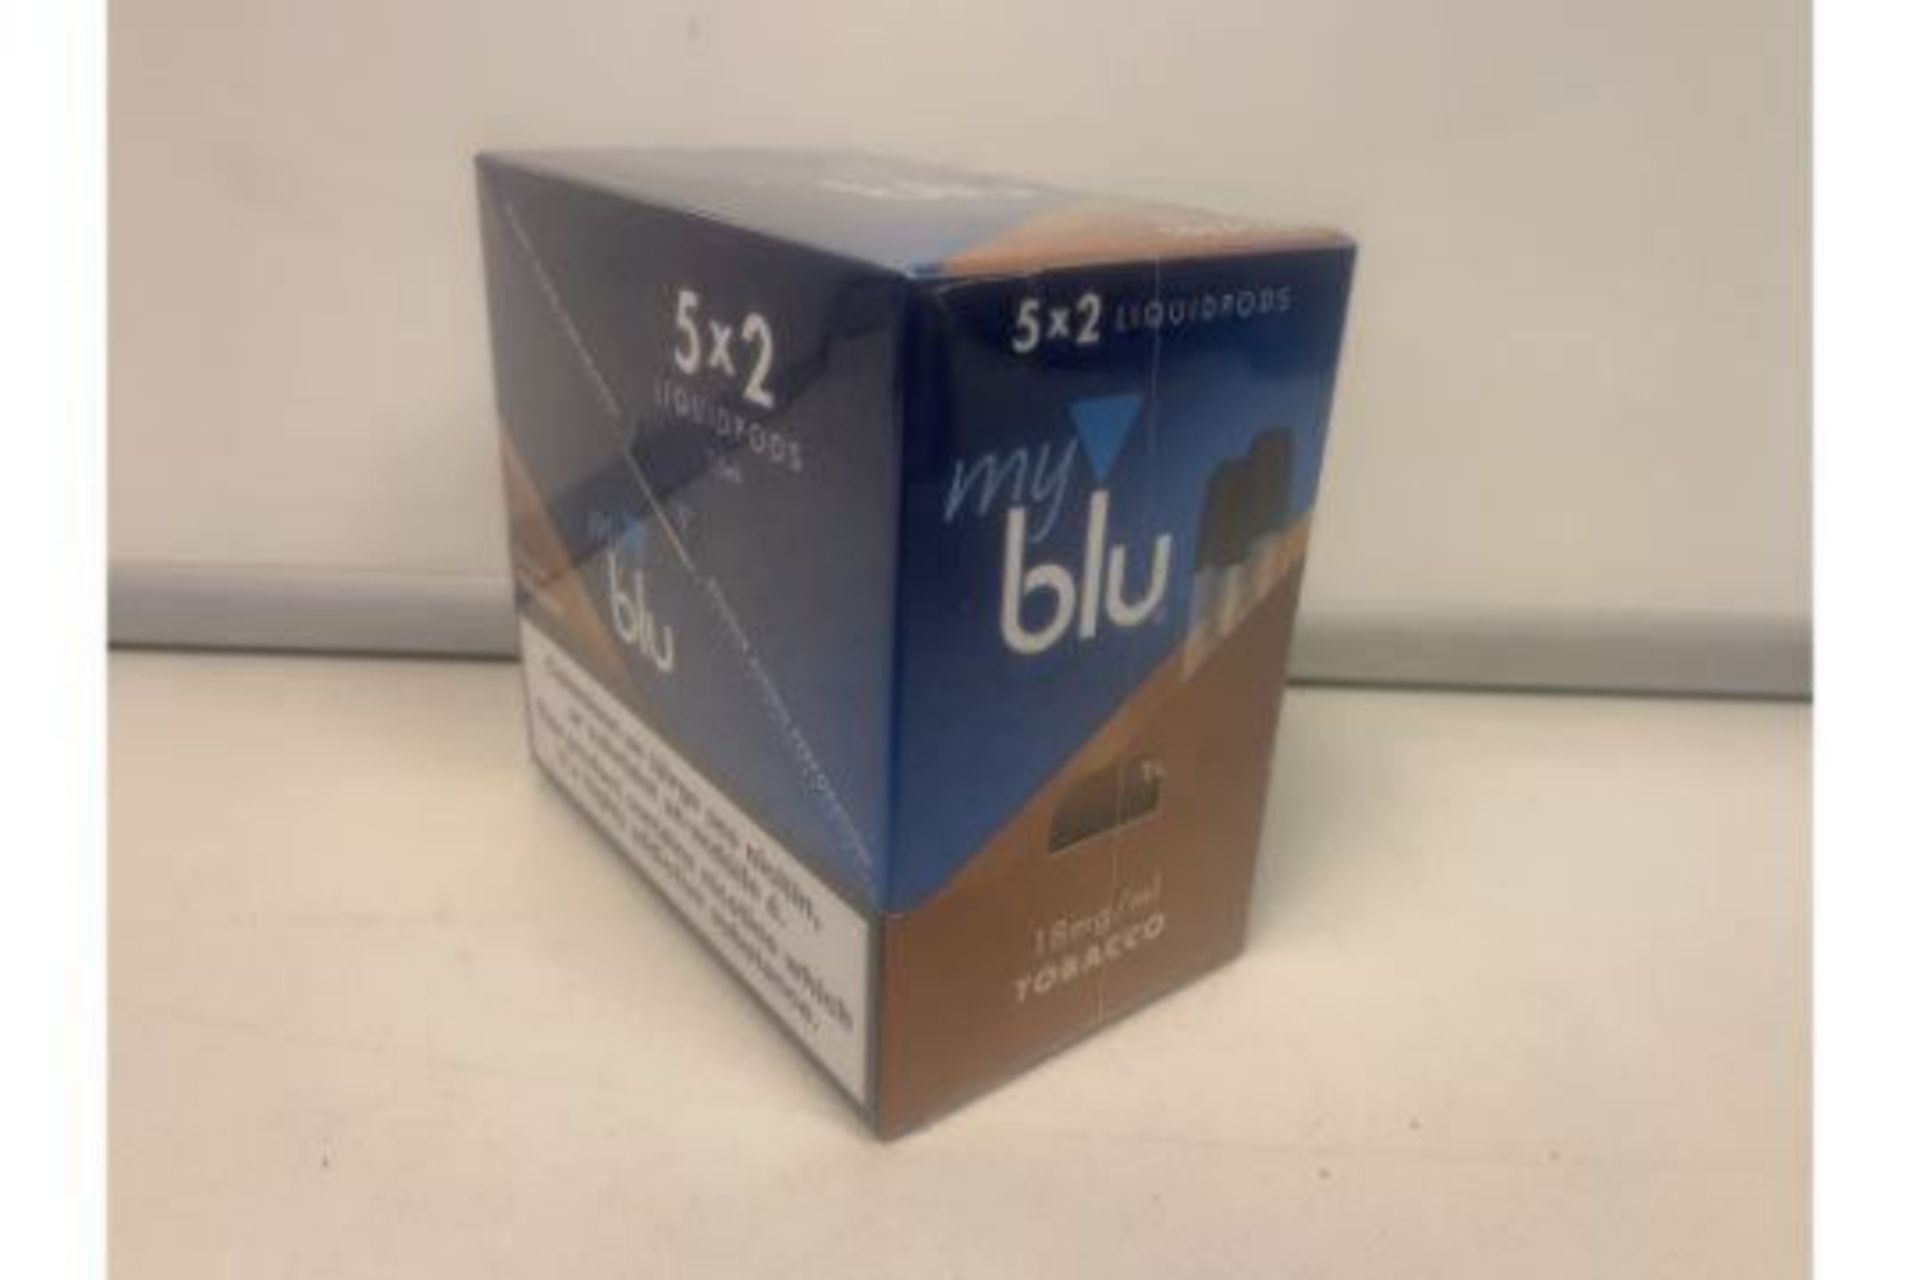 120 X NEW PACKAGED PACKS OF 2 MYBLU LIQUIDPODS. 0MG TOBACCO (ROW1MID)